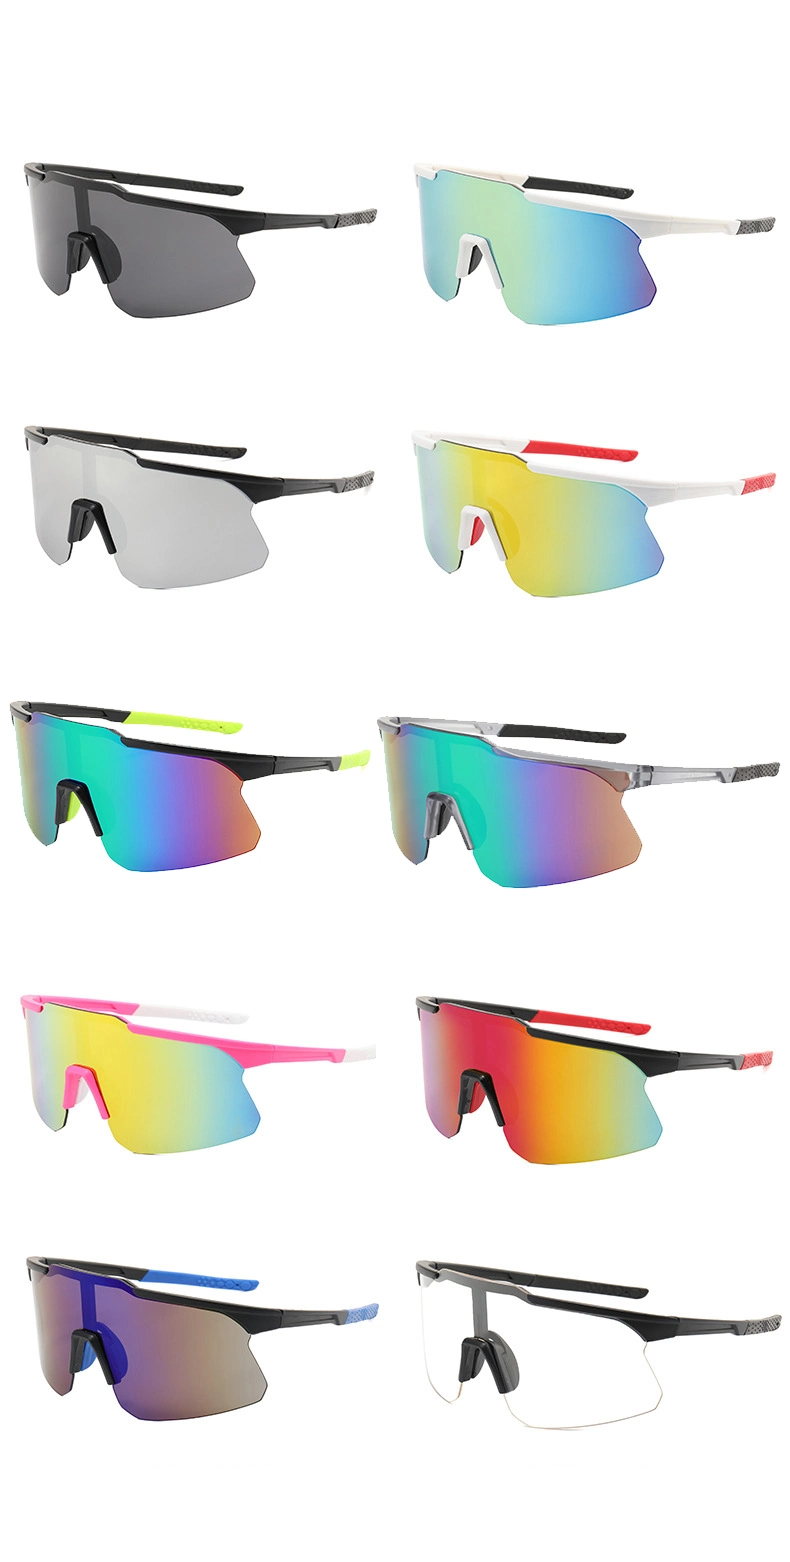 Superstarer 2022 Fashion Big Frame Multicolor Sports Unisex Glasses New Outdoor Windproof Cycling Ski Beach Sunglasses for Mens